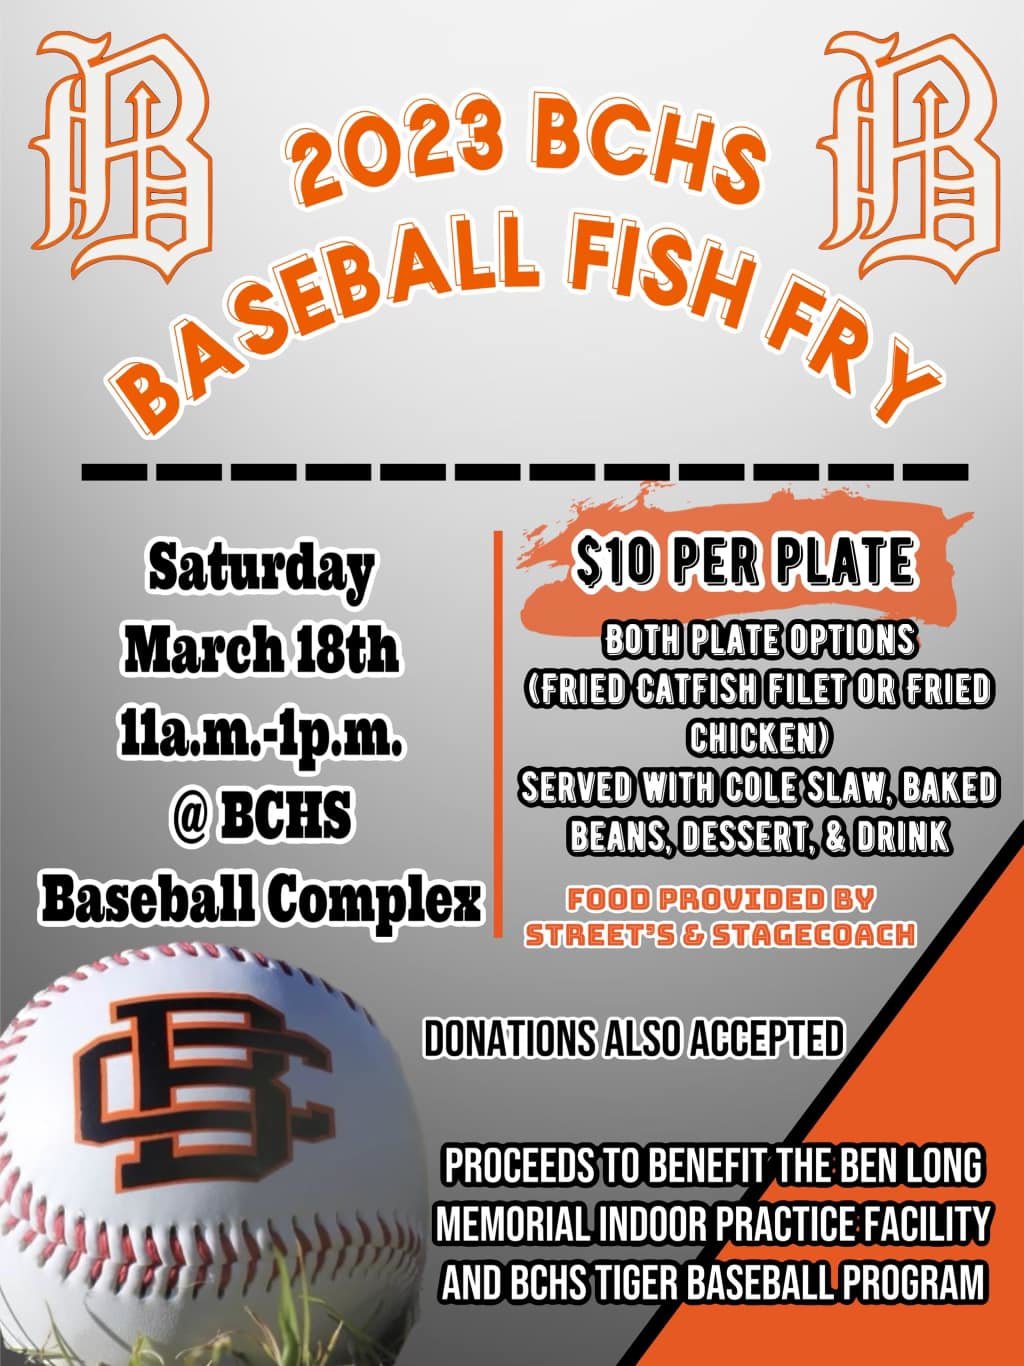 The Baldwin County baseball team is hosting a fish fry this Saturday to benefit the program and the Ben Long Memorial Indoor Practice Facility. Catfish filet or fried chicken plates will be available for $10 and donations will also be accepted.